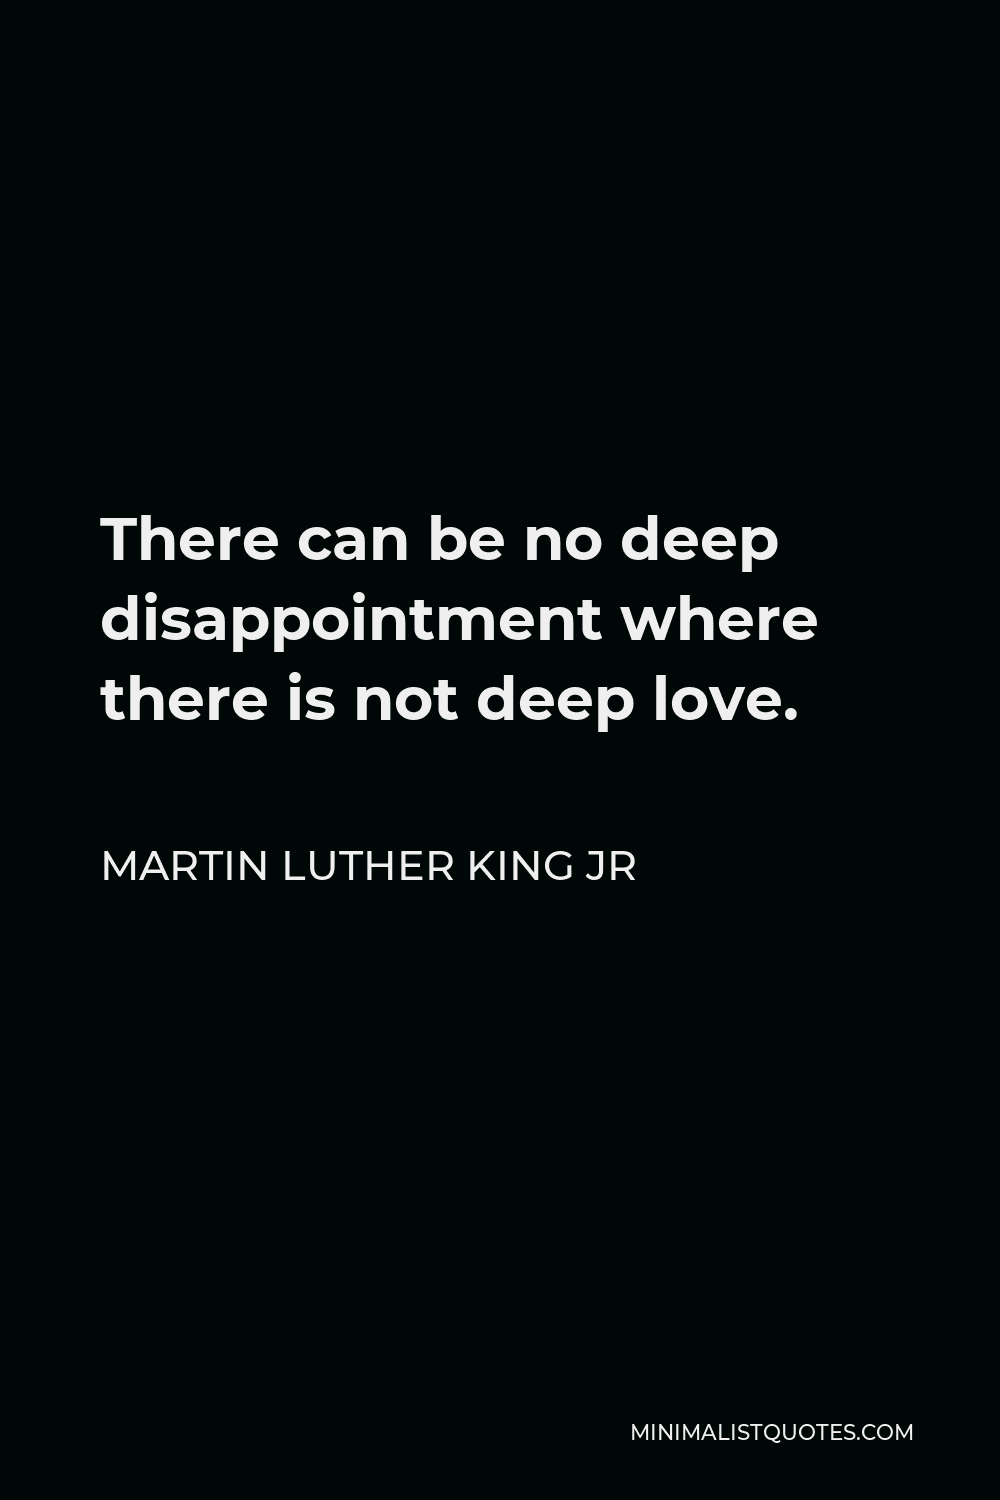 Martin Luther King Jr Quote: There can be no deep disappointment where there is not deep love.